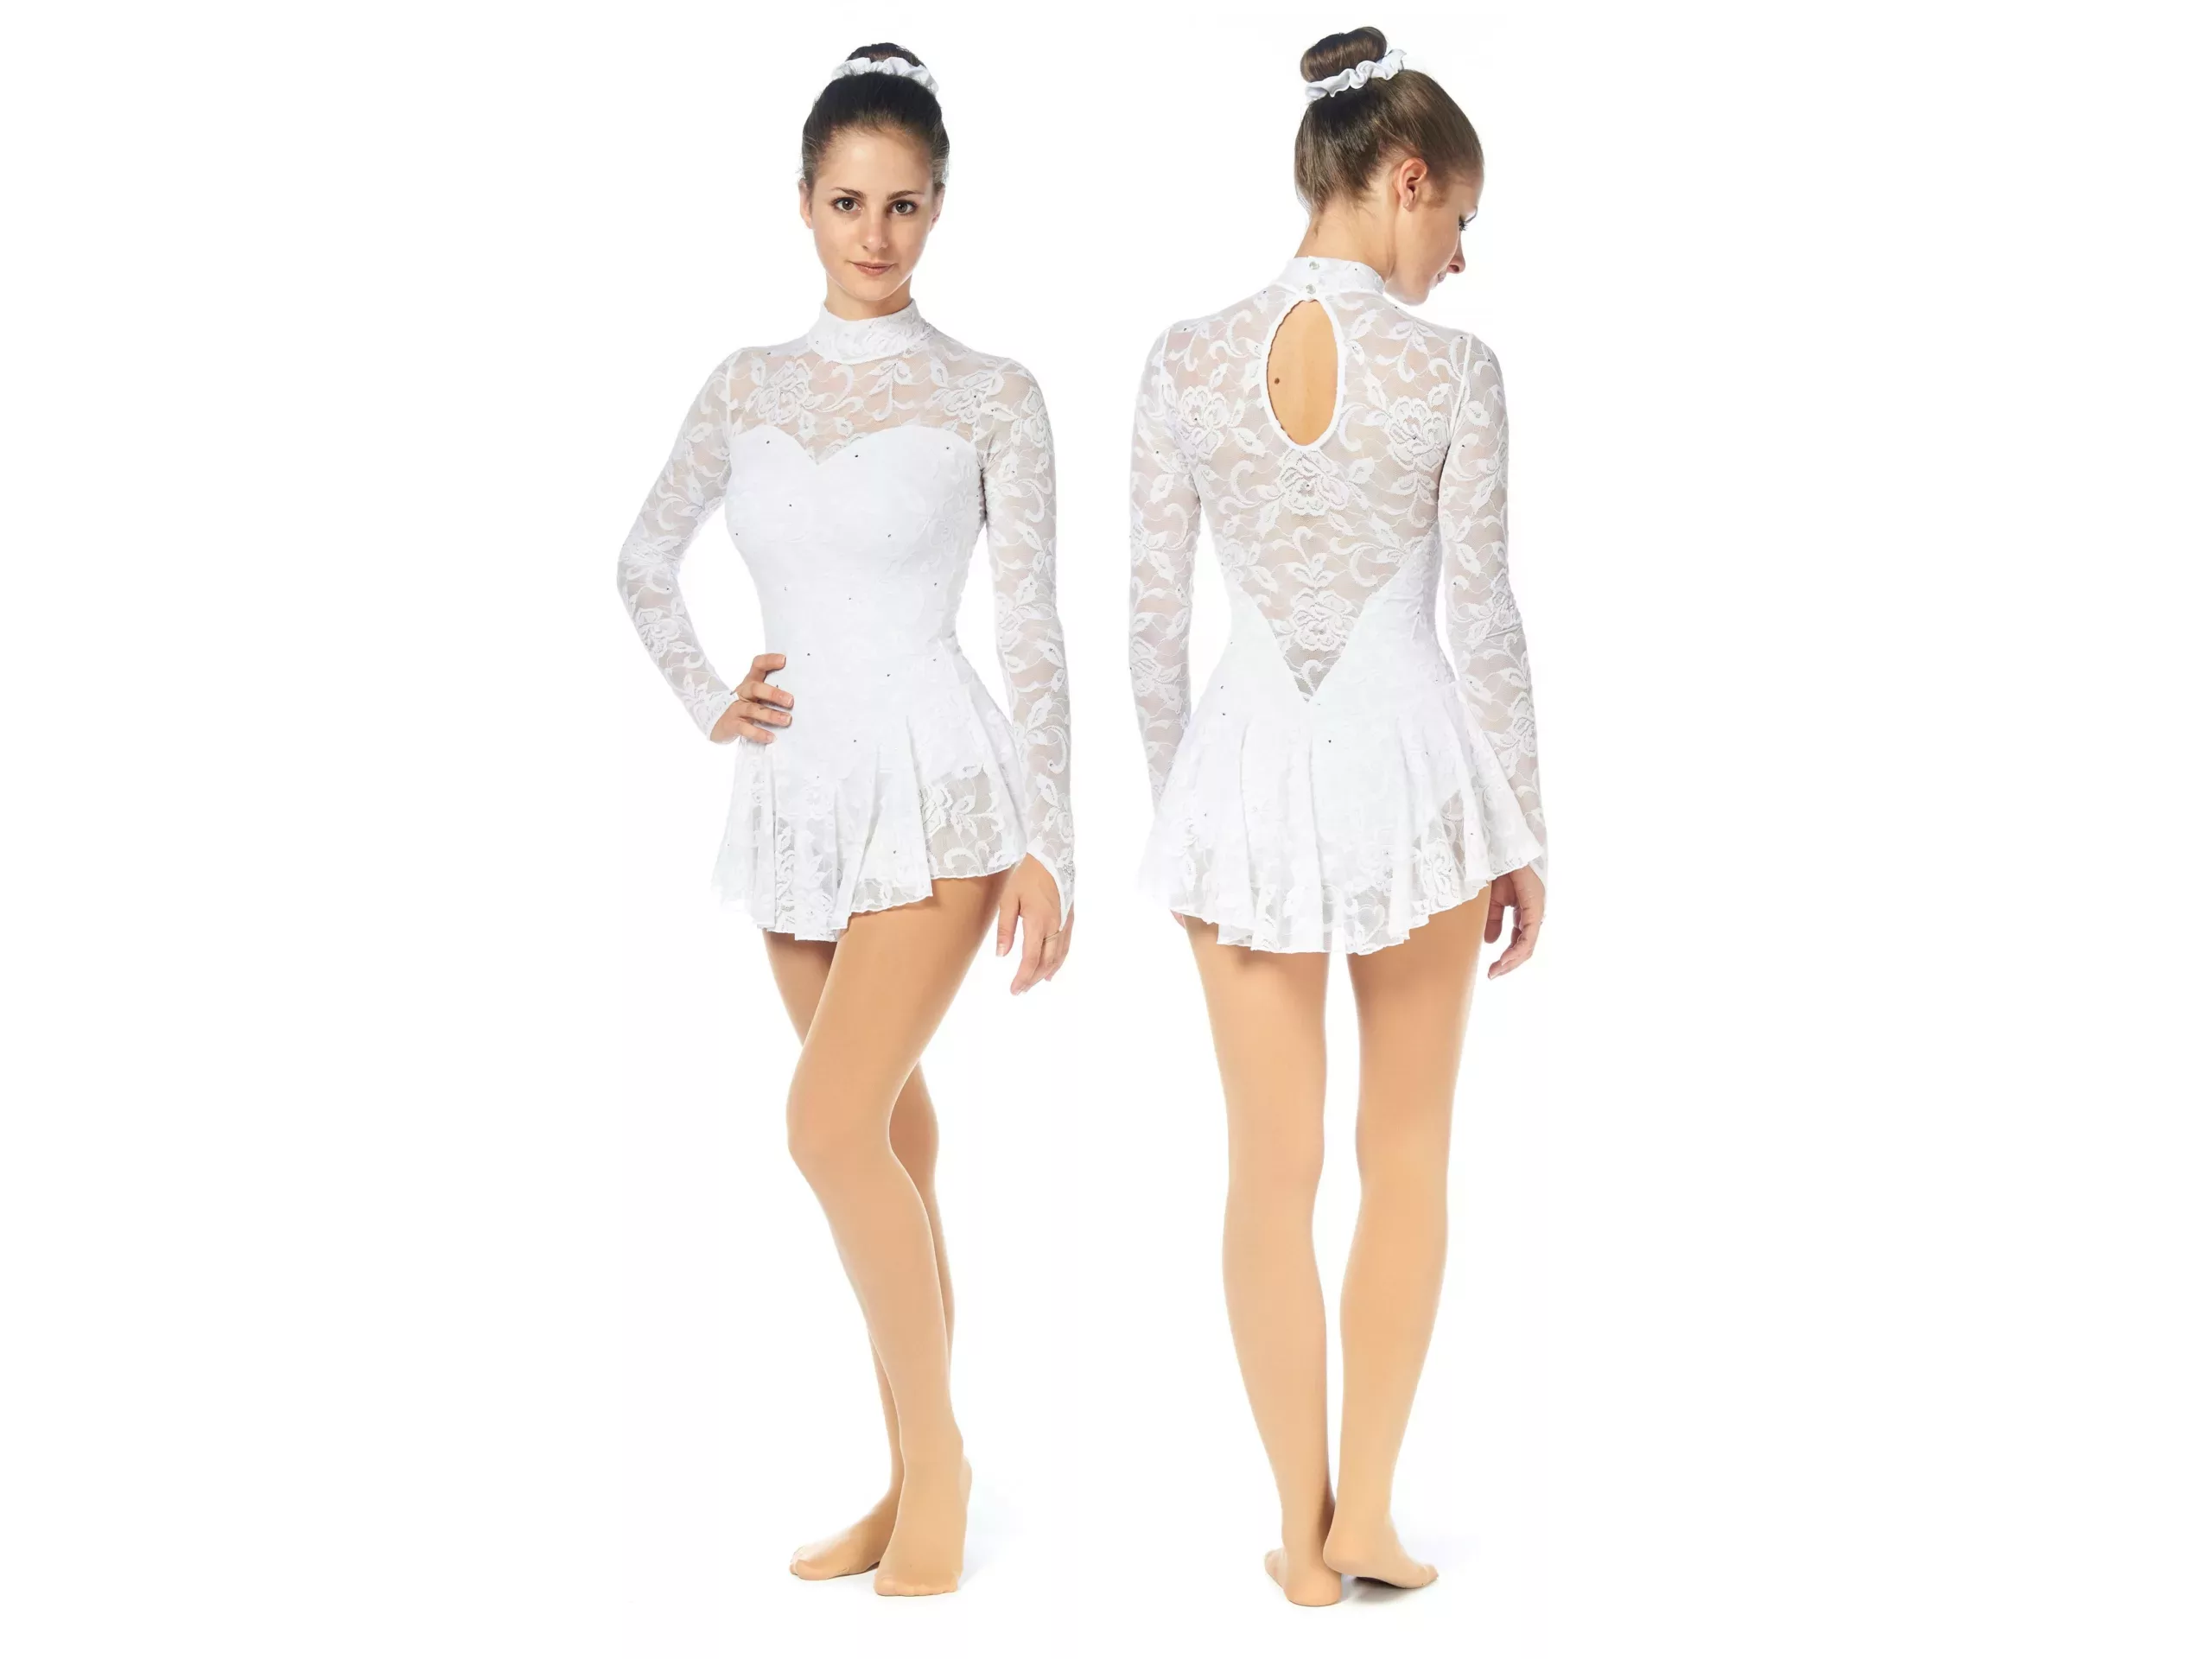 Robe de patinage artistique Sagester Style : 202SW, blanche Robes